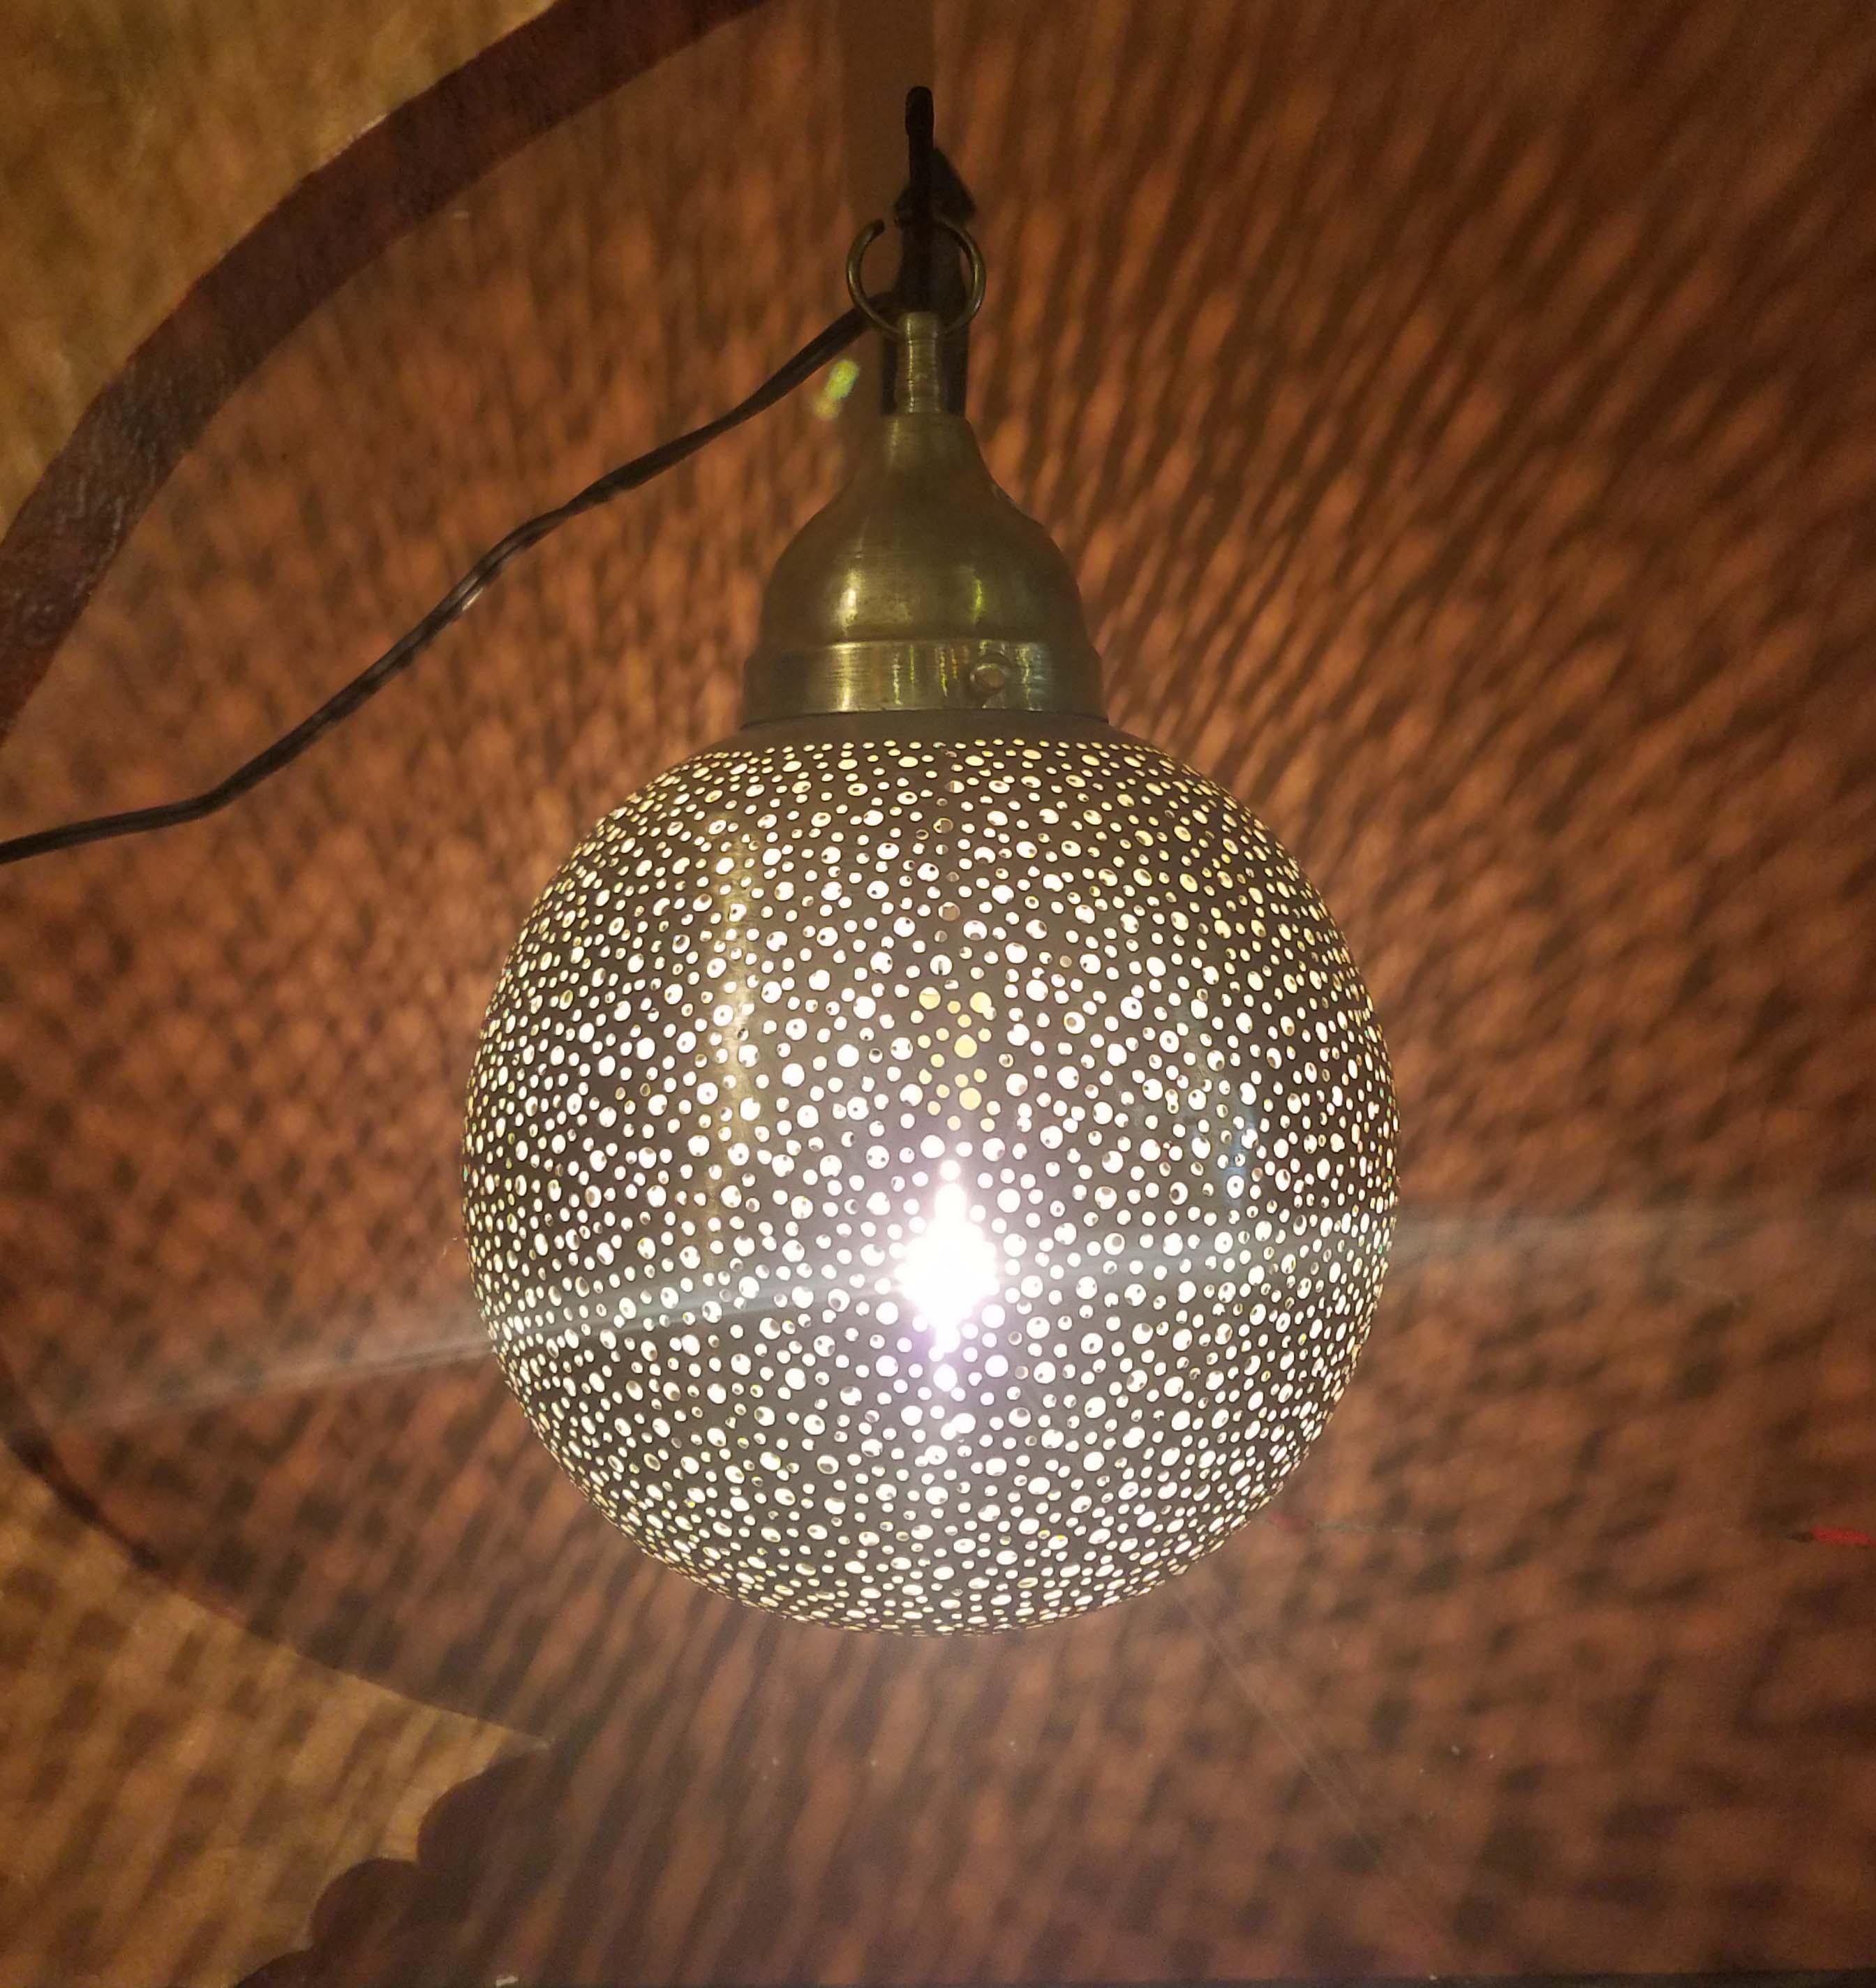 Made from pure copper, these beautiful wall and ceiling lamps are sure to be show-stoppers anywhere in your home. Each is handmade using ancient artisan methods which consist of puncturing the surface with a unique, elaborate design, so that, with a